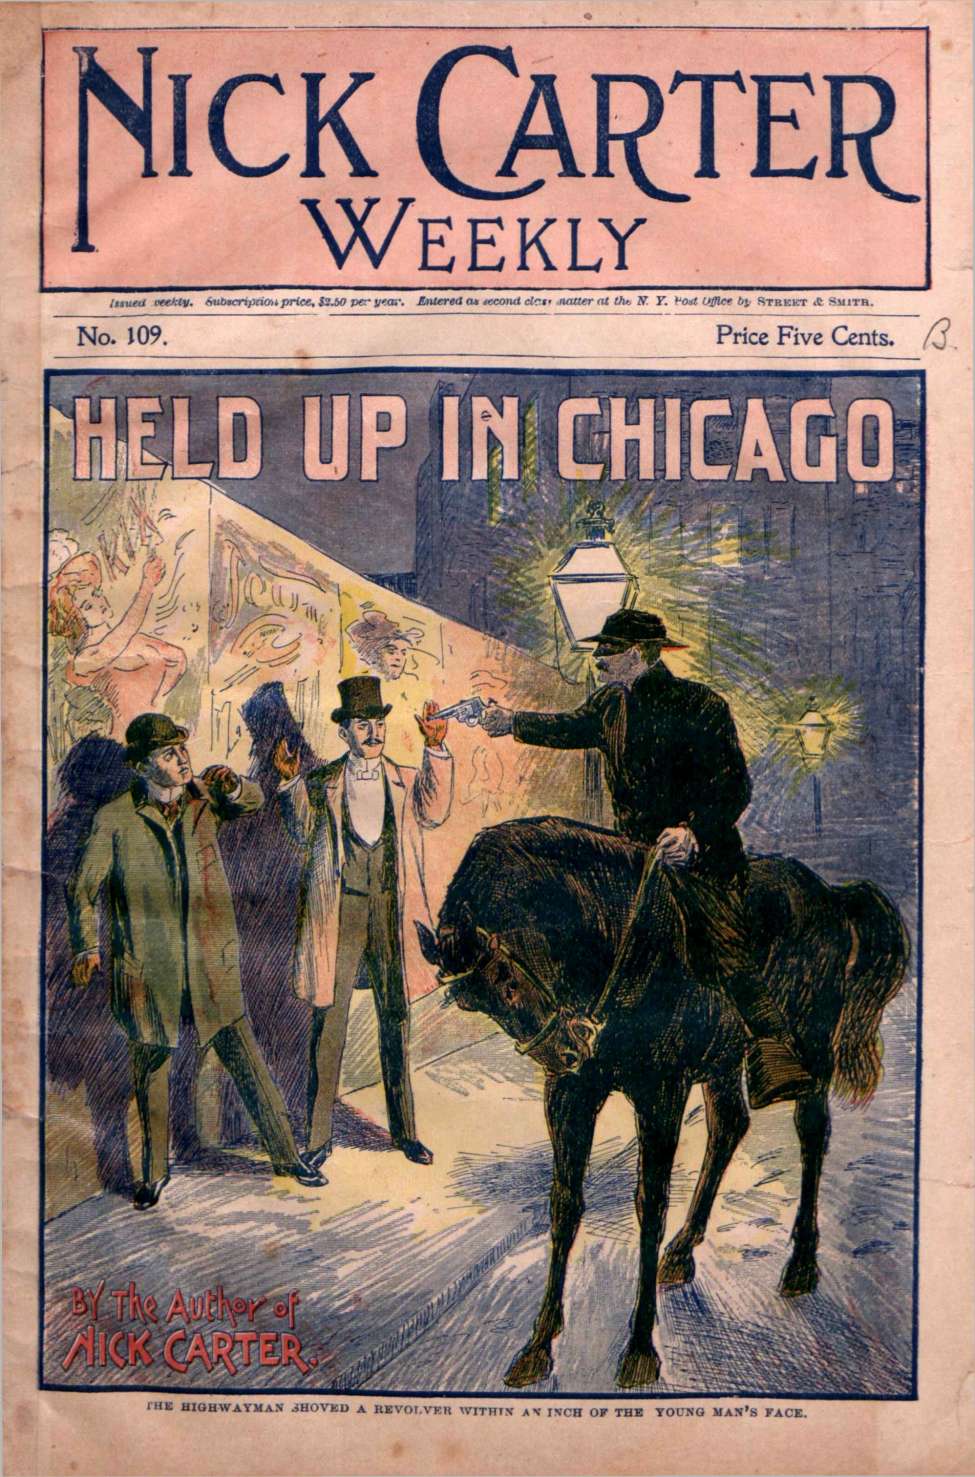 Comic Book Cover For Nick Carter Weekly 109 - Held Up In Chicago